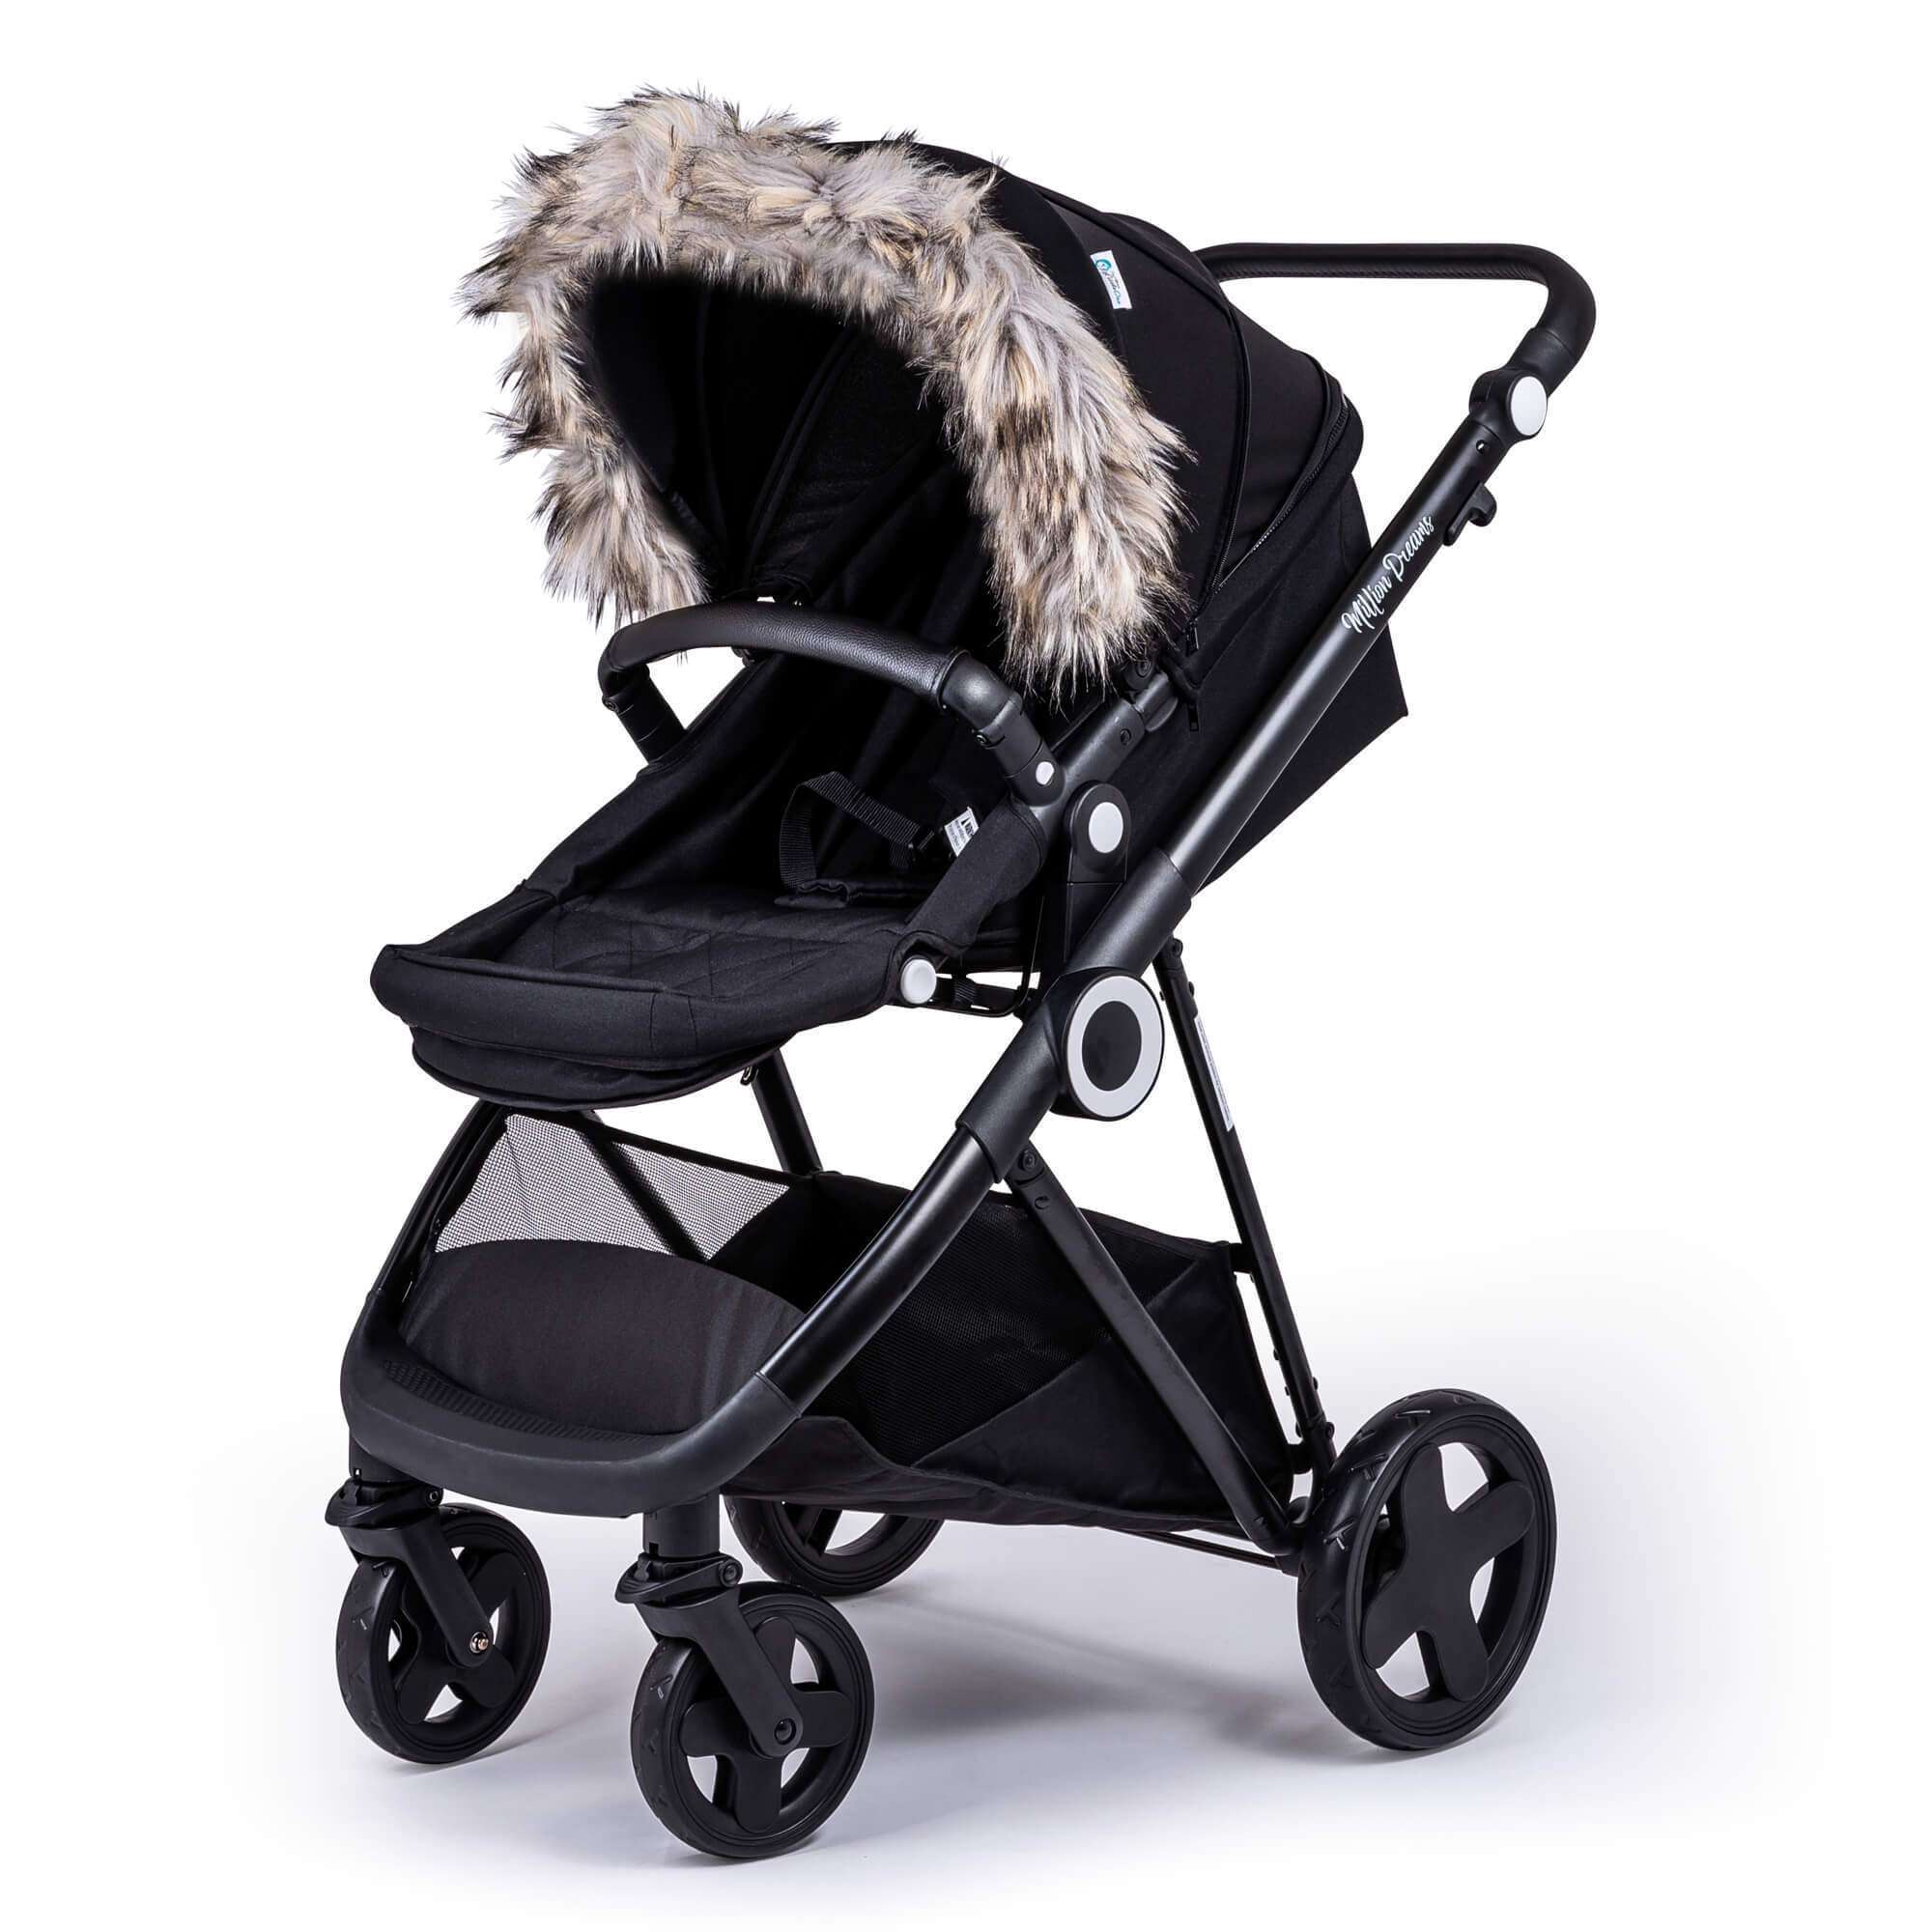 Pram Fur Hood Trim Attachment For Pushchair Compatible with Kinderkraft - Light Grey / Fits All Models | For Your Little One